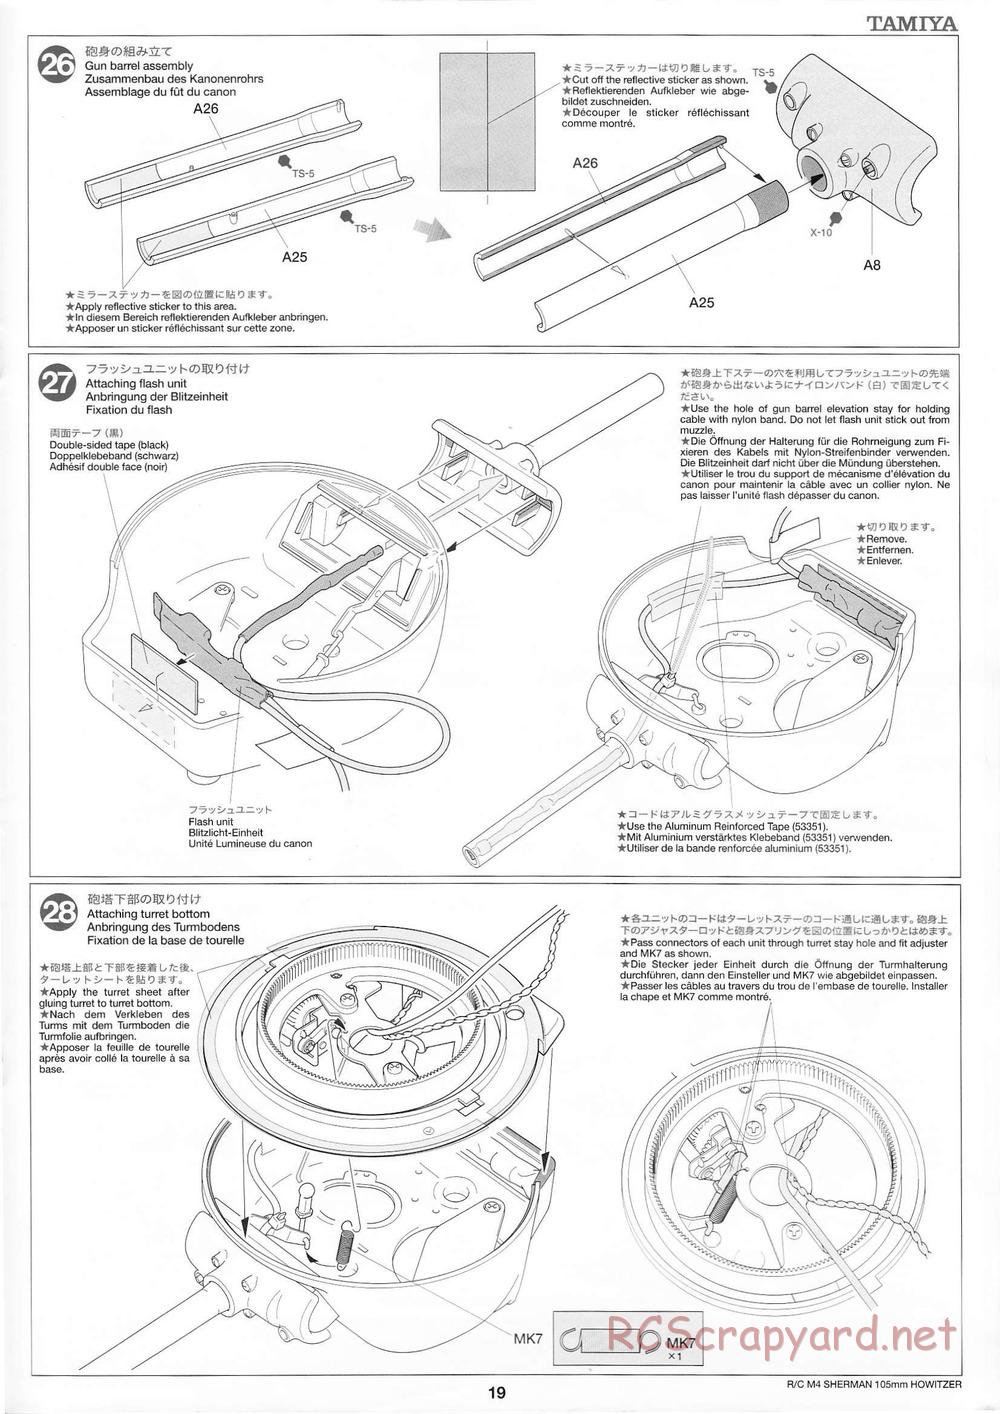 Tamiya - M4 Sherman 105mm Howitzer - 1/16 Scale Chassis - Manual - Page 19